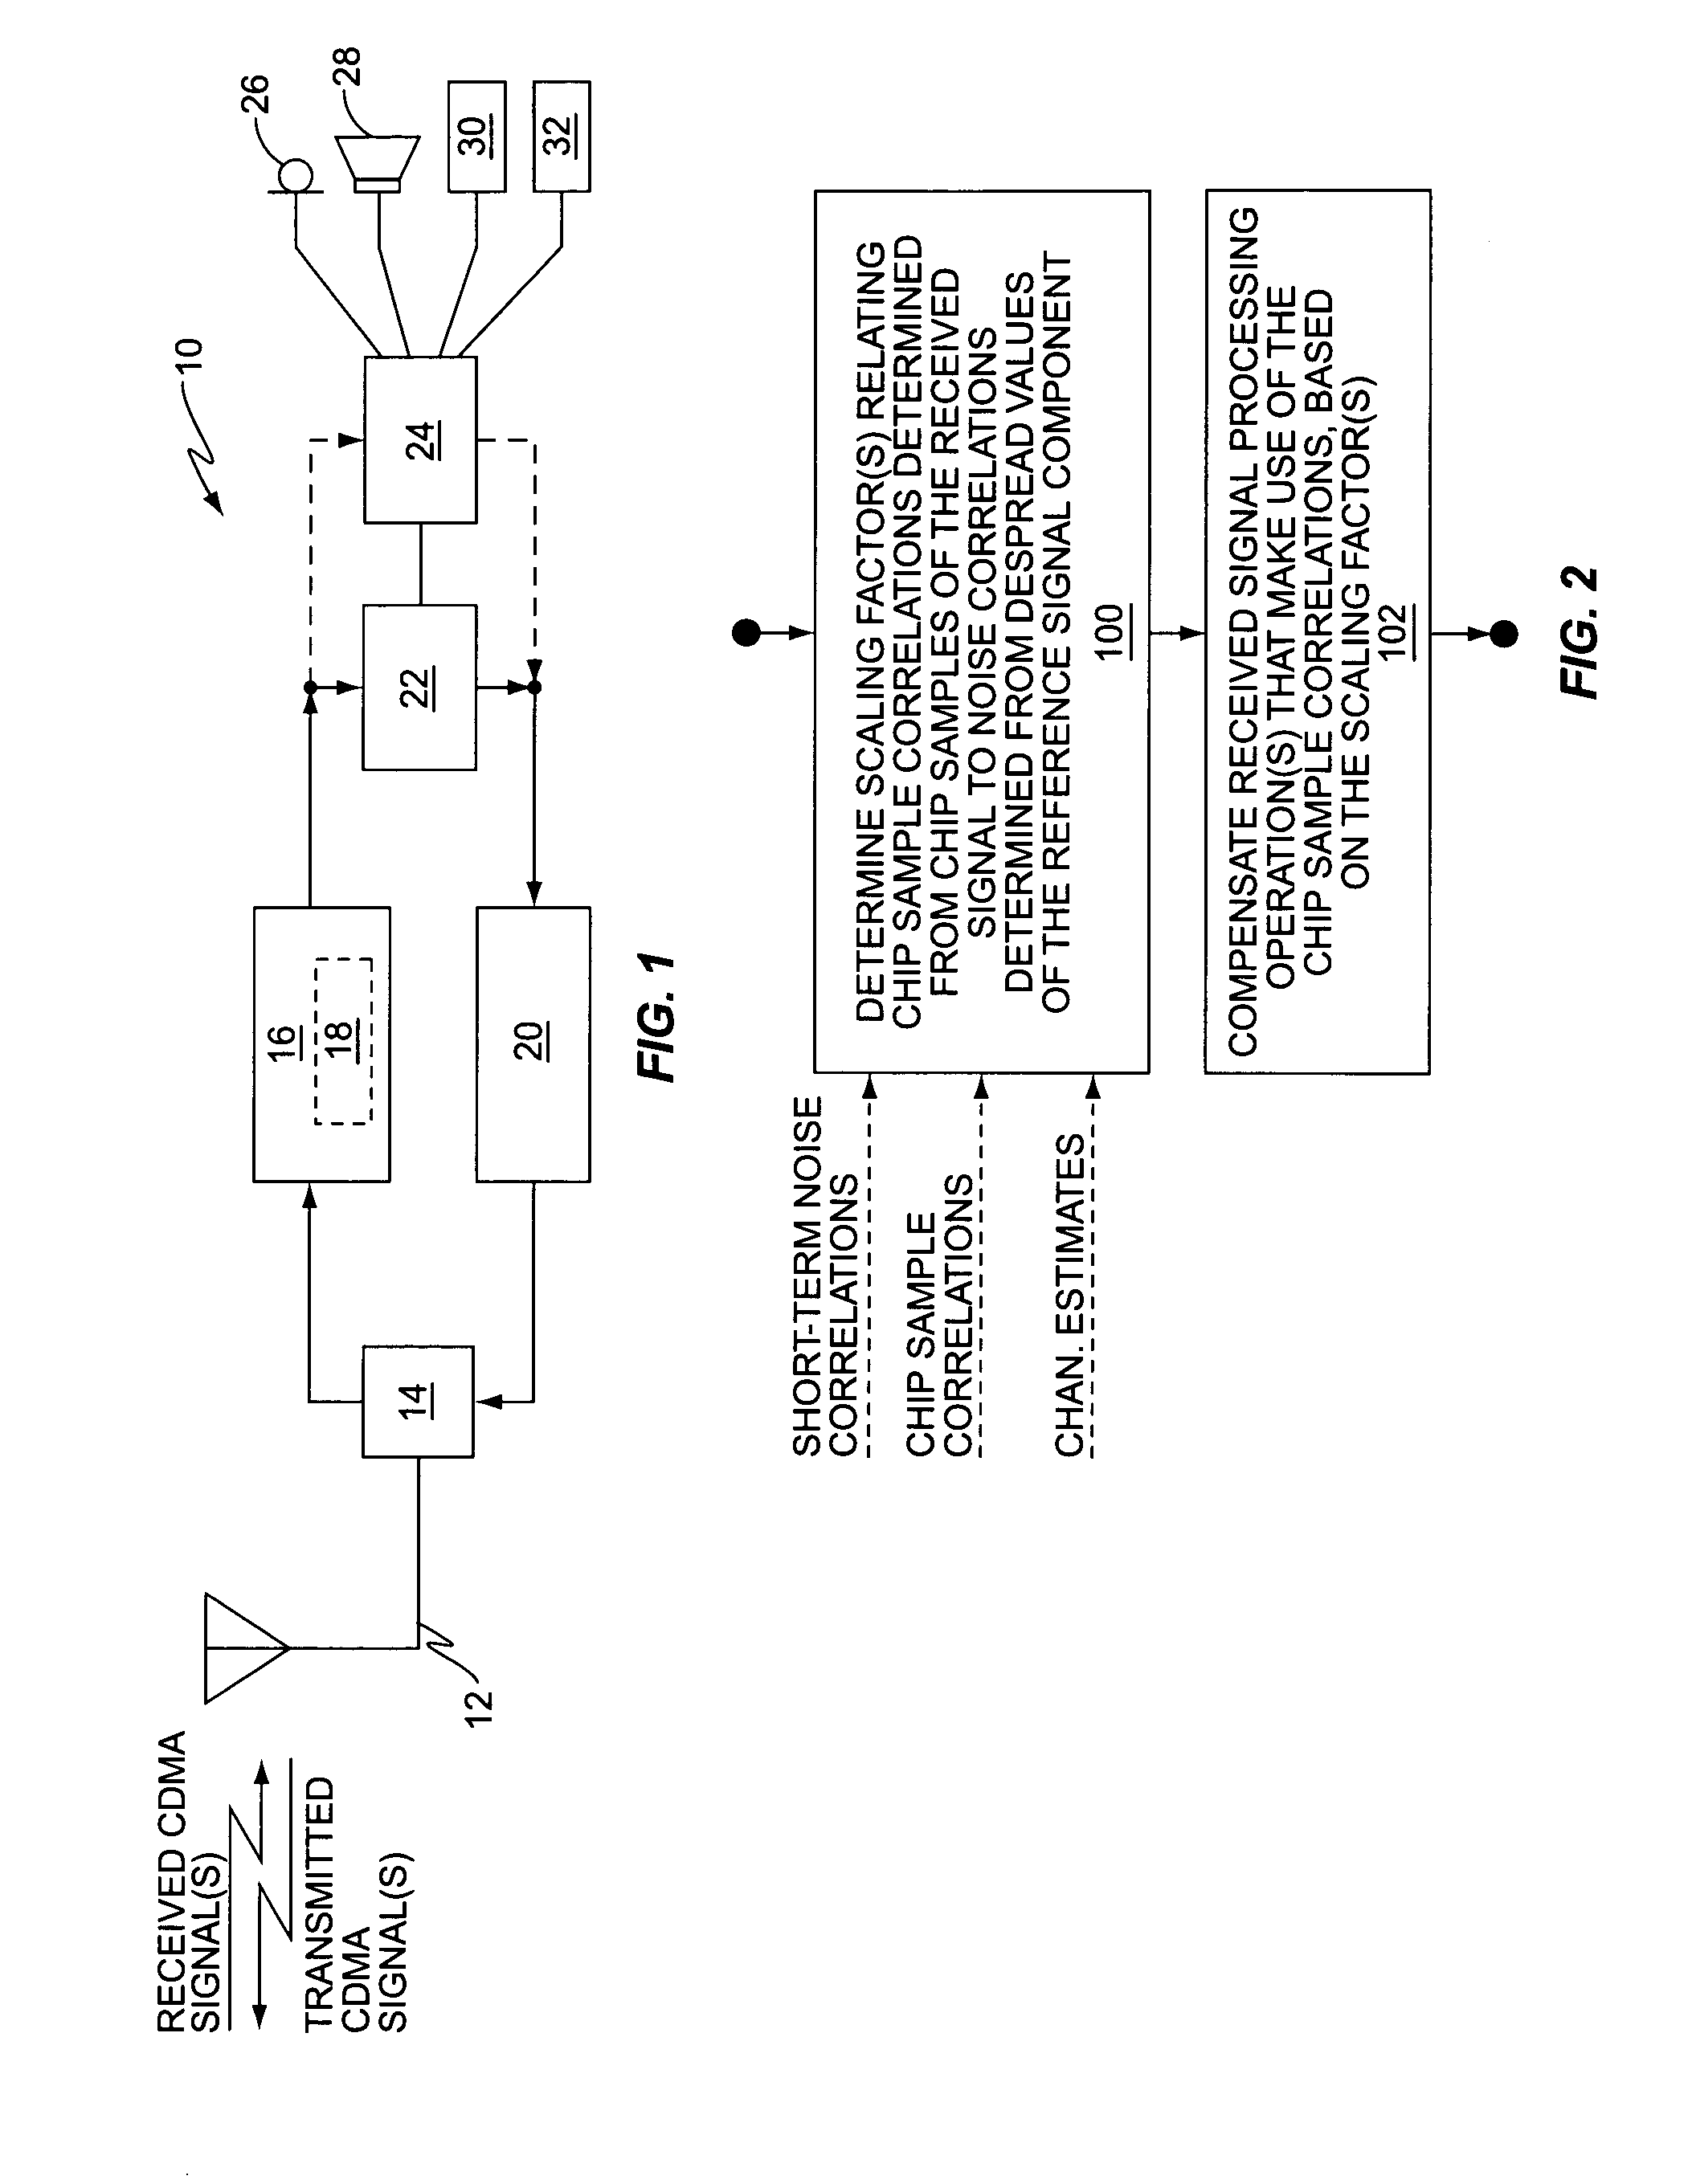 Method and apparatus for using chip sample correlations in one or more received signal processing operations